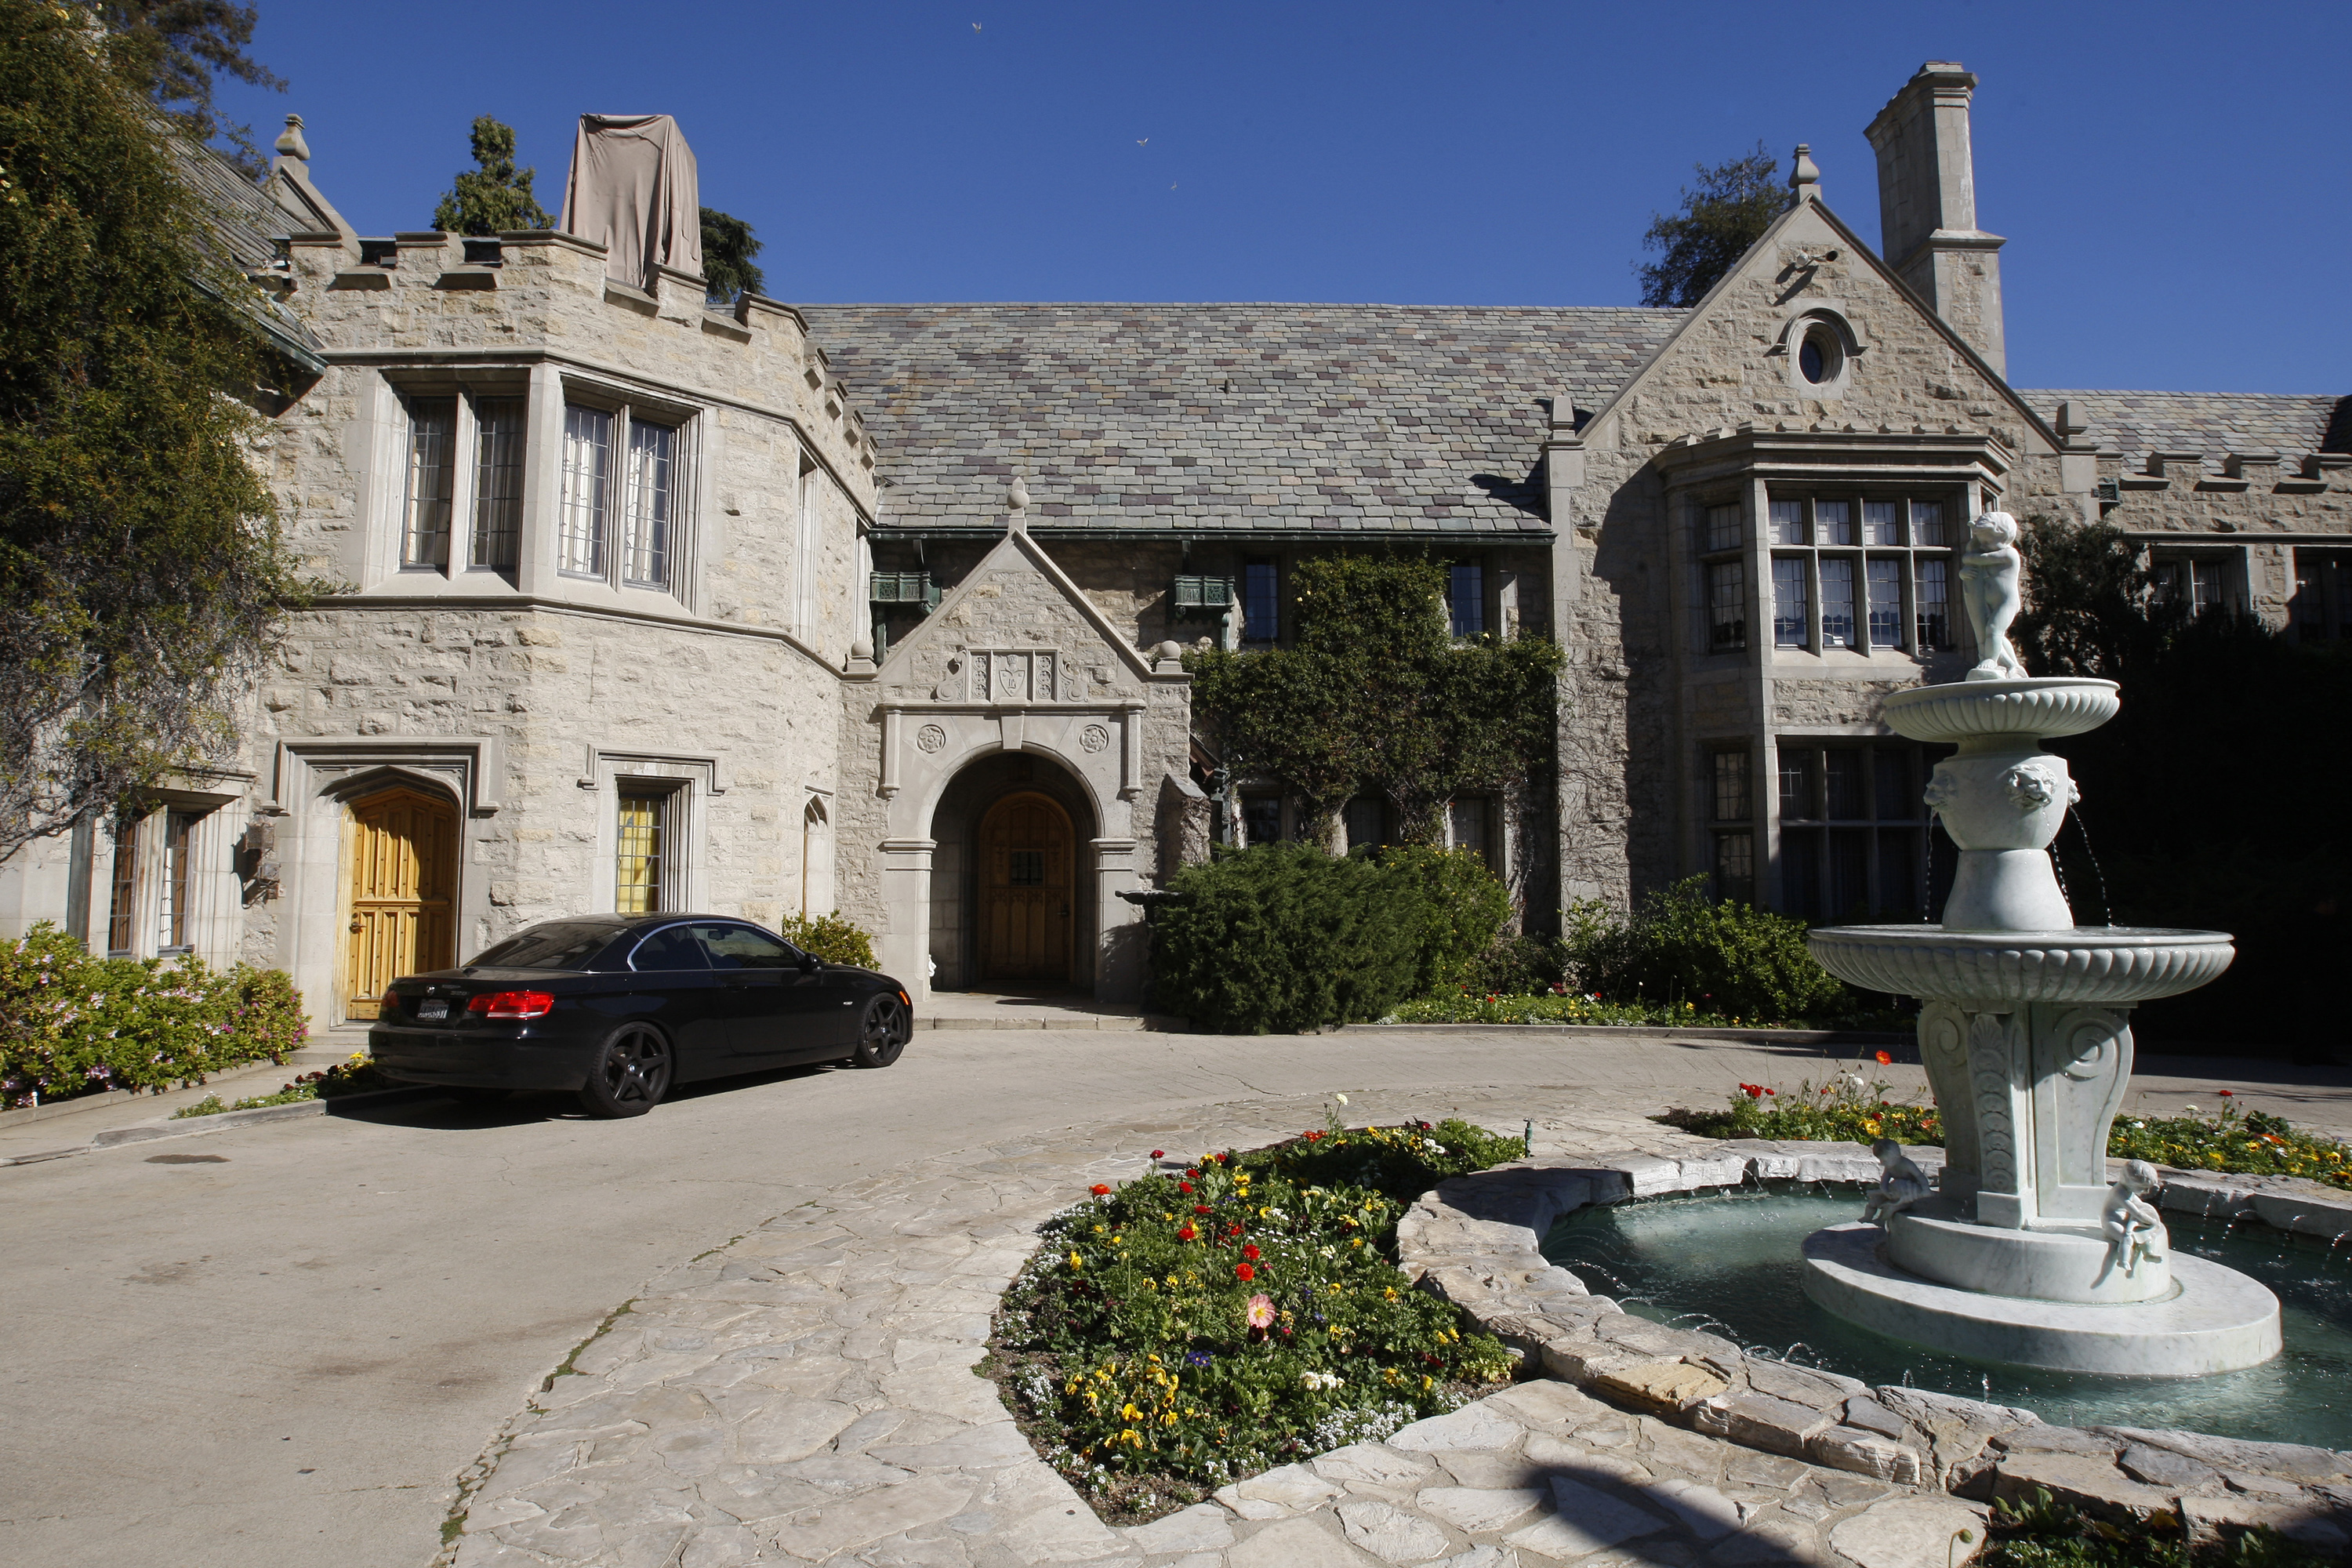 A view of the Playboy Mansion in Los Angeles, California February 10, 2011. REUTERS/Fred Prouser (UNITED STATES - Tags: ENTERTAINMENT) - RTXXPQF